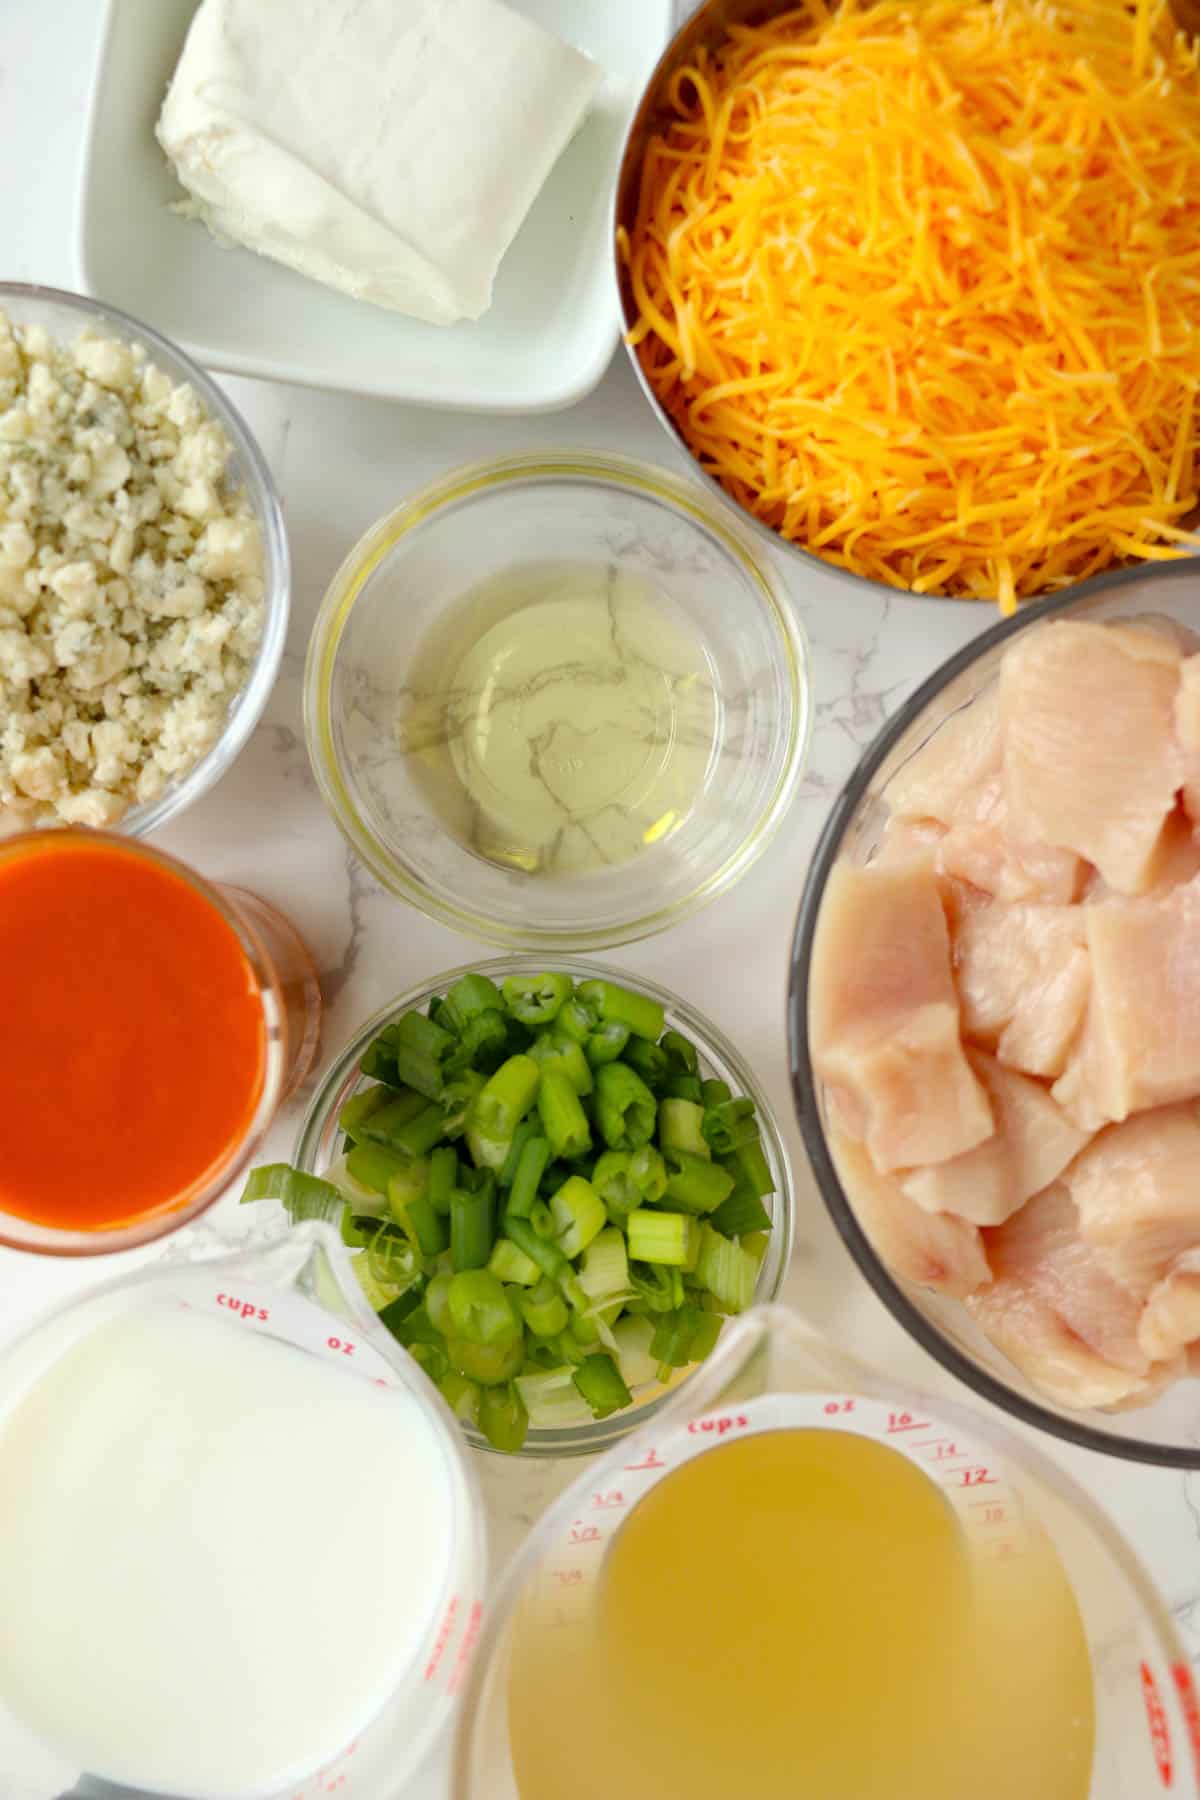 Ingredients for making Instant Pot buffalo chicken pasta.